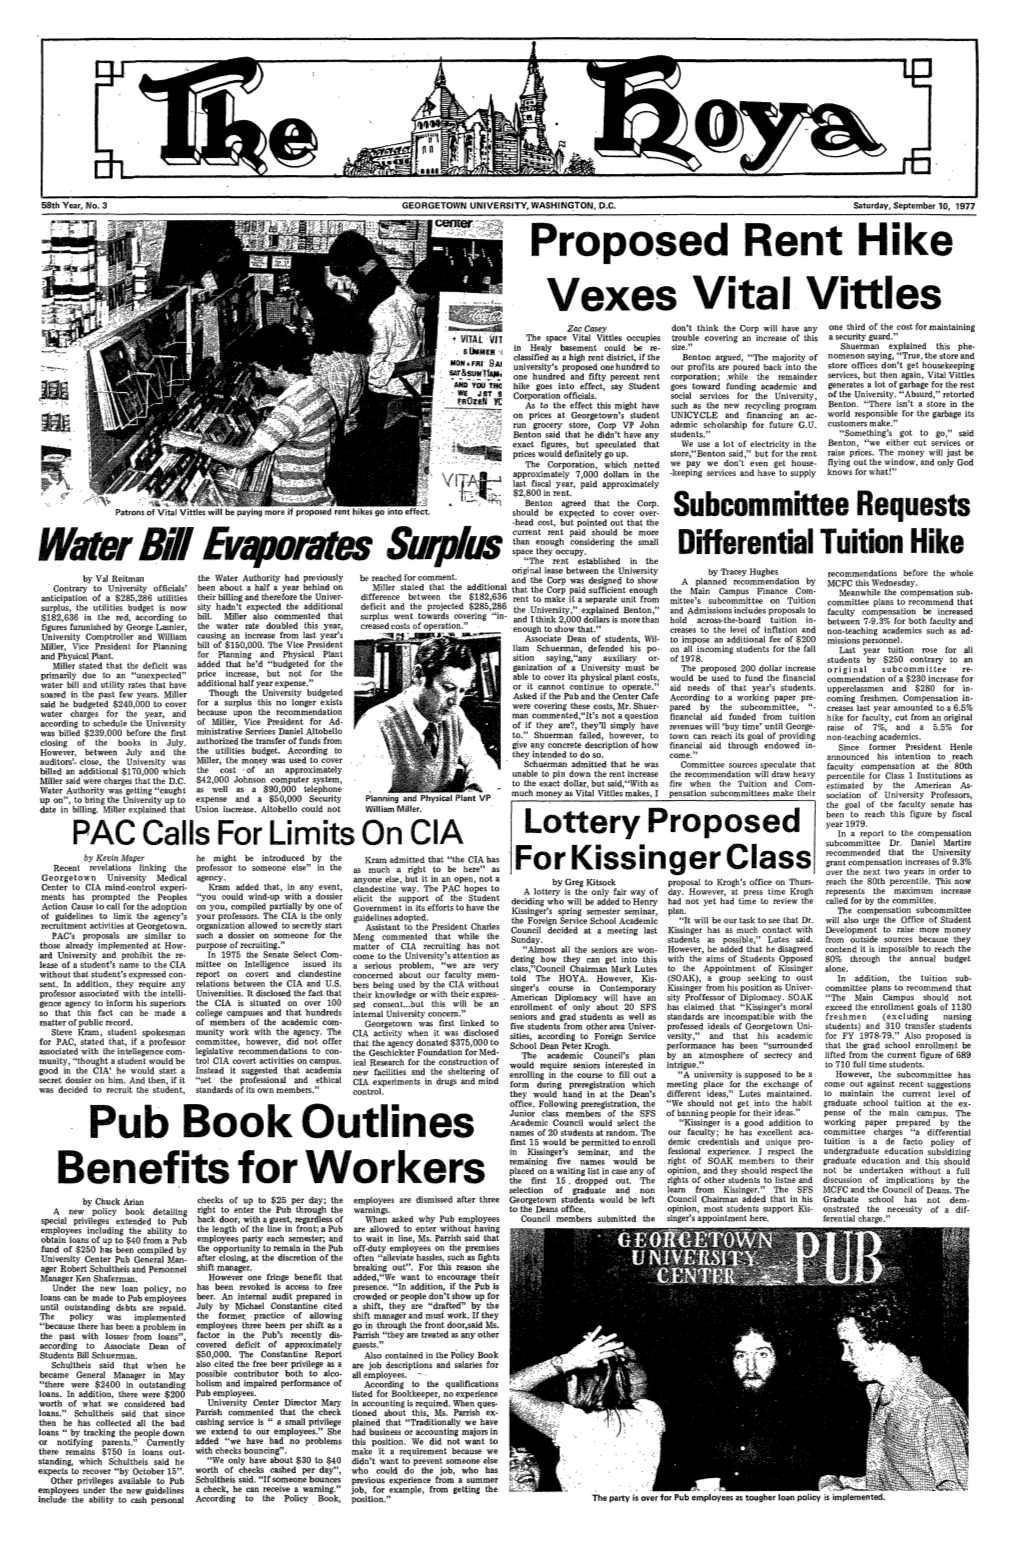 Proposed Rent Hike Vexes Vital Vittles Pub Book Outlines Benefits